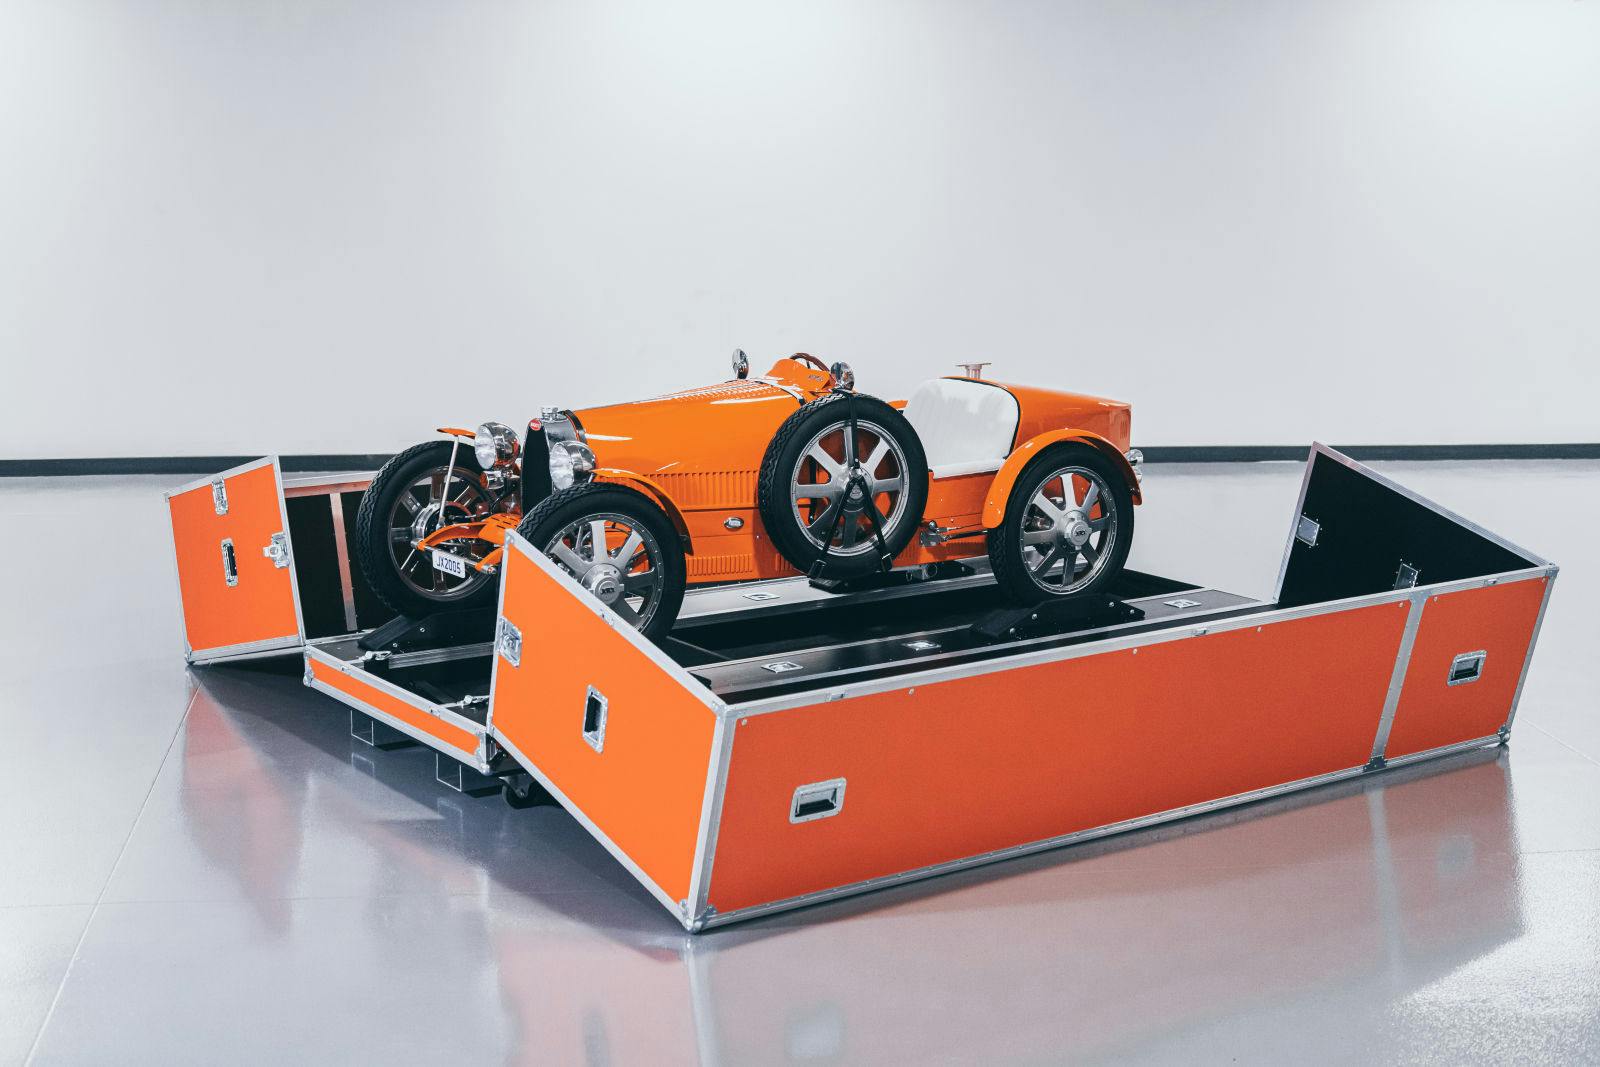 A personalized, hand-built Transport Case allows for safe transport of the vehicle.